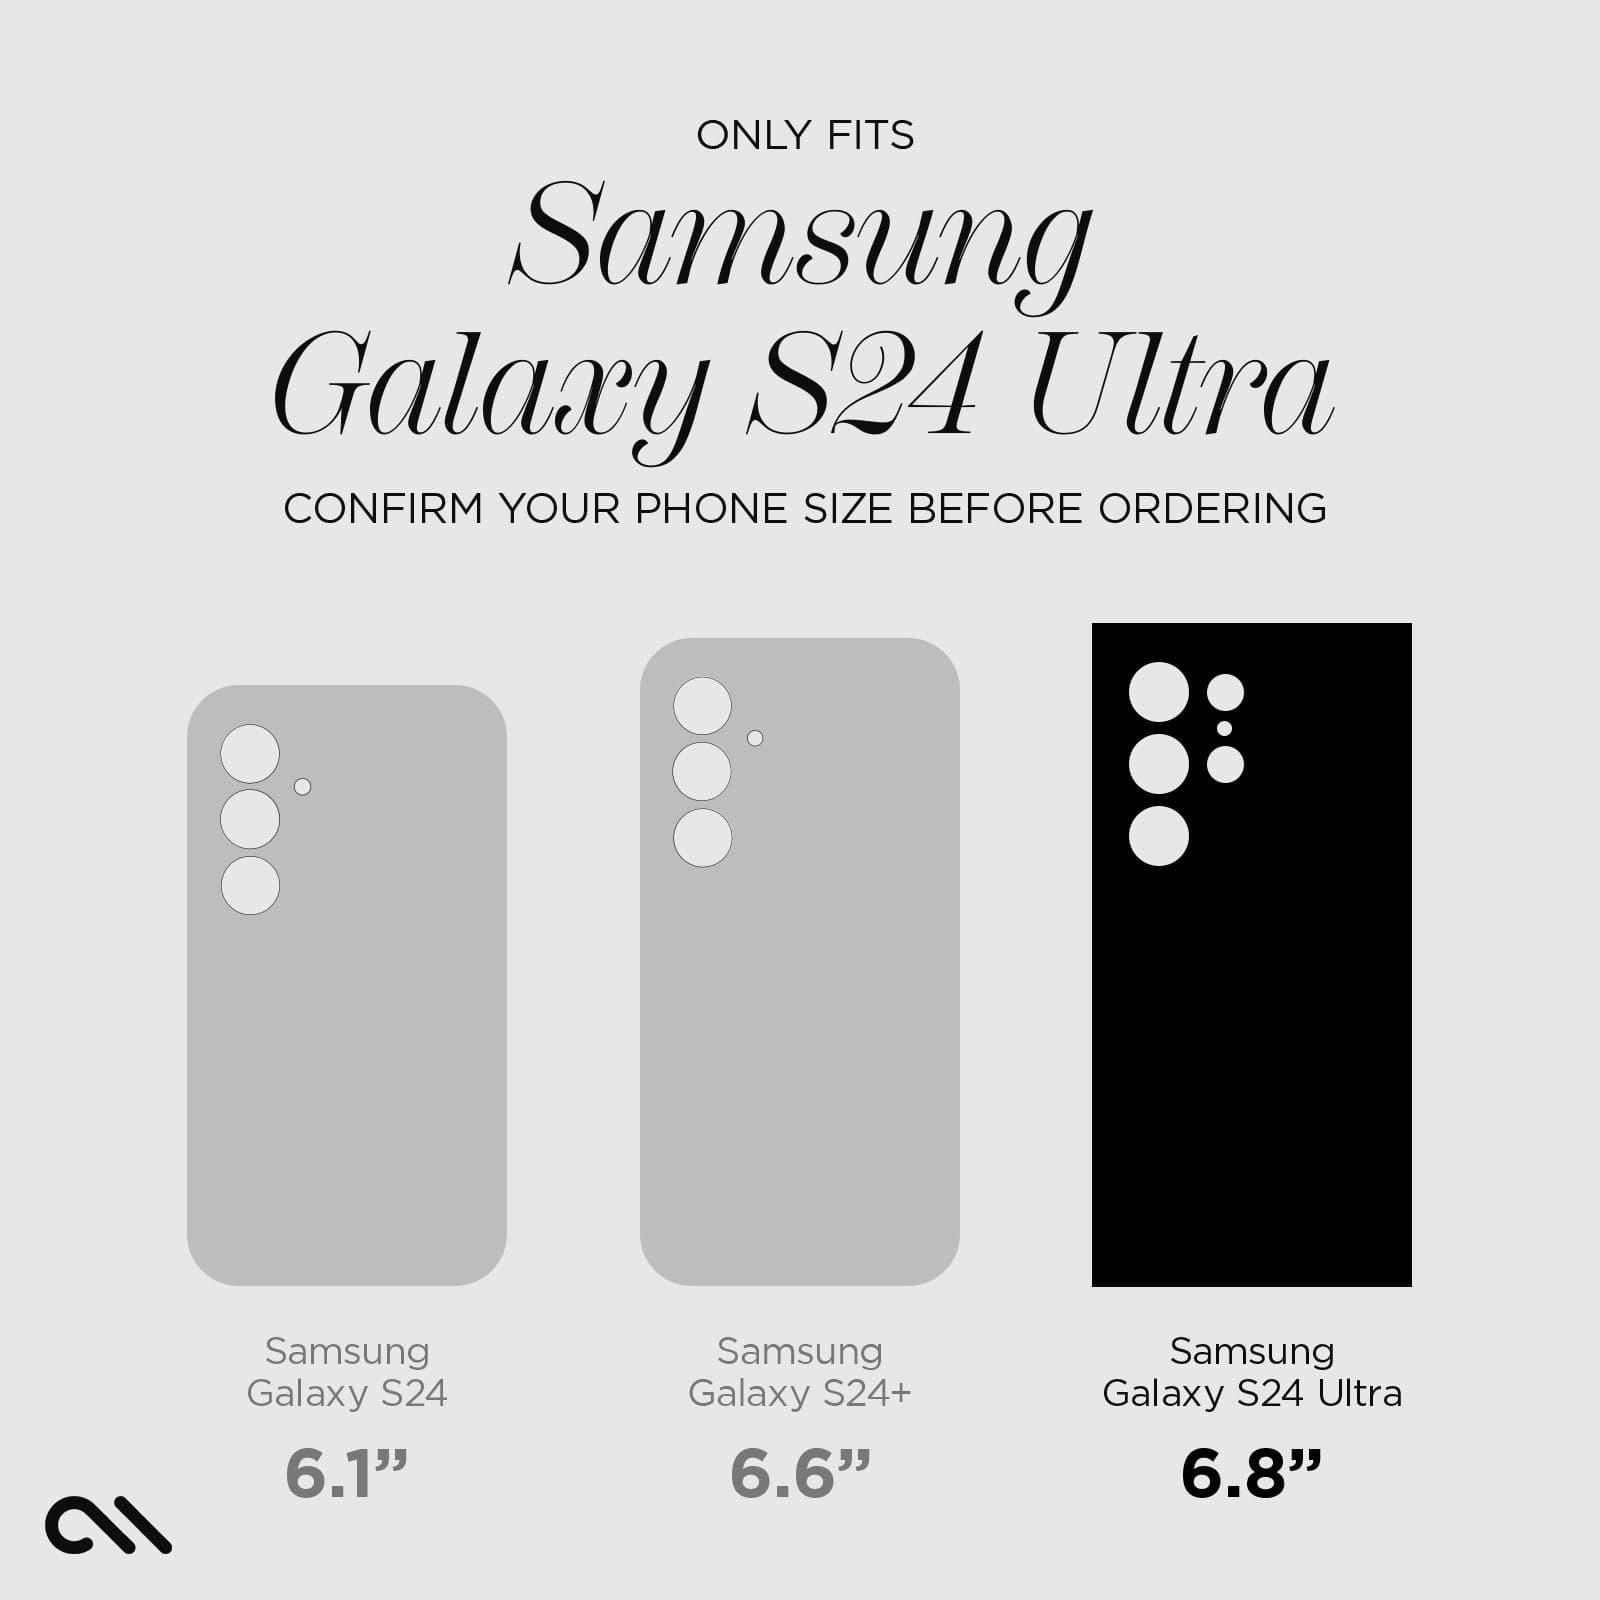 ONLY FITS SAMSUNG GALAXY S24 ULTRA. CONFIRM YOUR PHONE SIZE BEFORE ORDERING